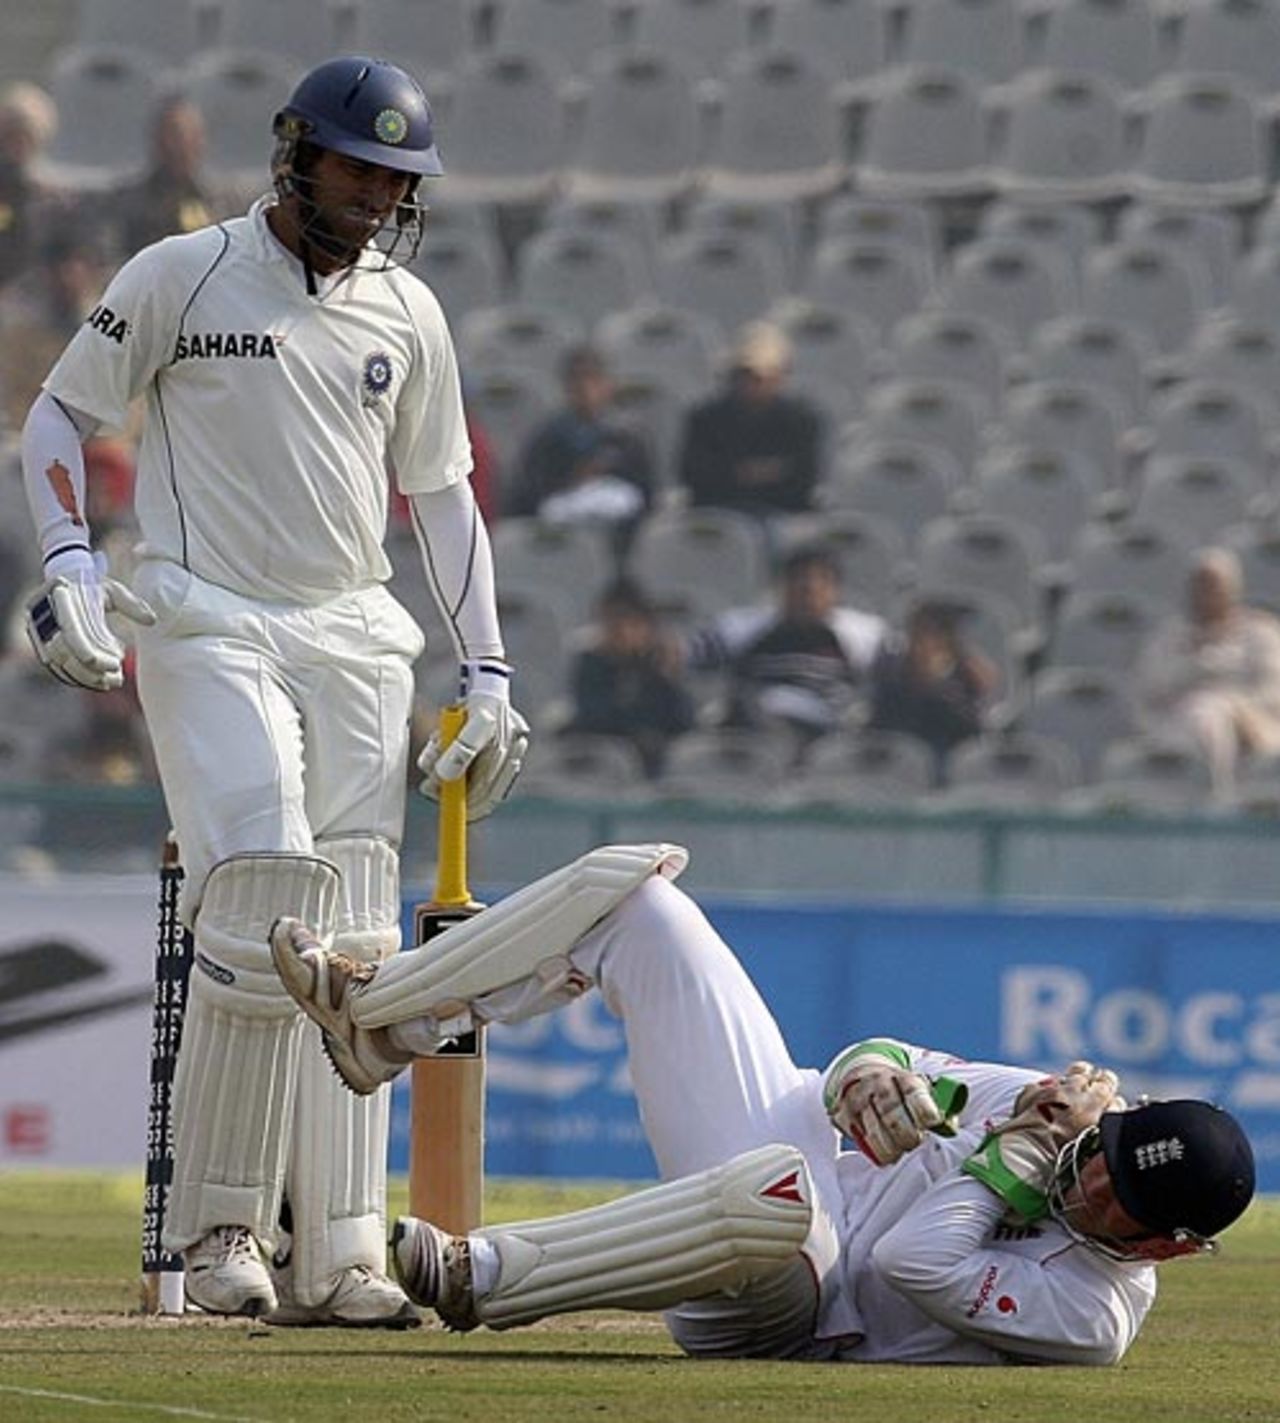 Matt Prior is caught offguard by Yuvraj Singh's reverse sweep, India v England, 2nd Test, Mohali, 5th day, December 23, 2008